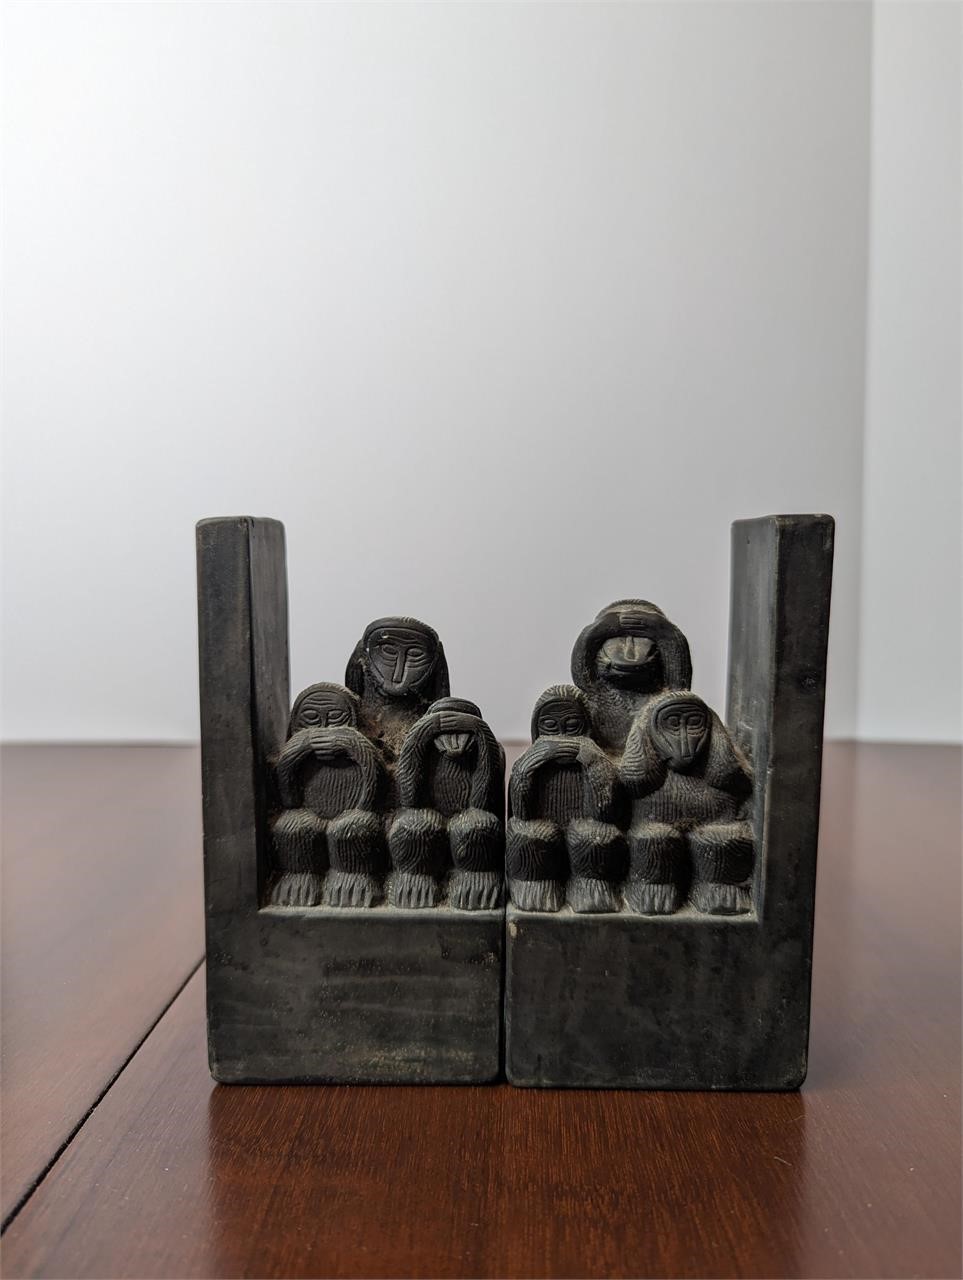 Three wise monkeys Bookends